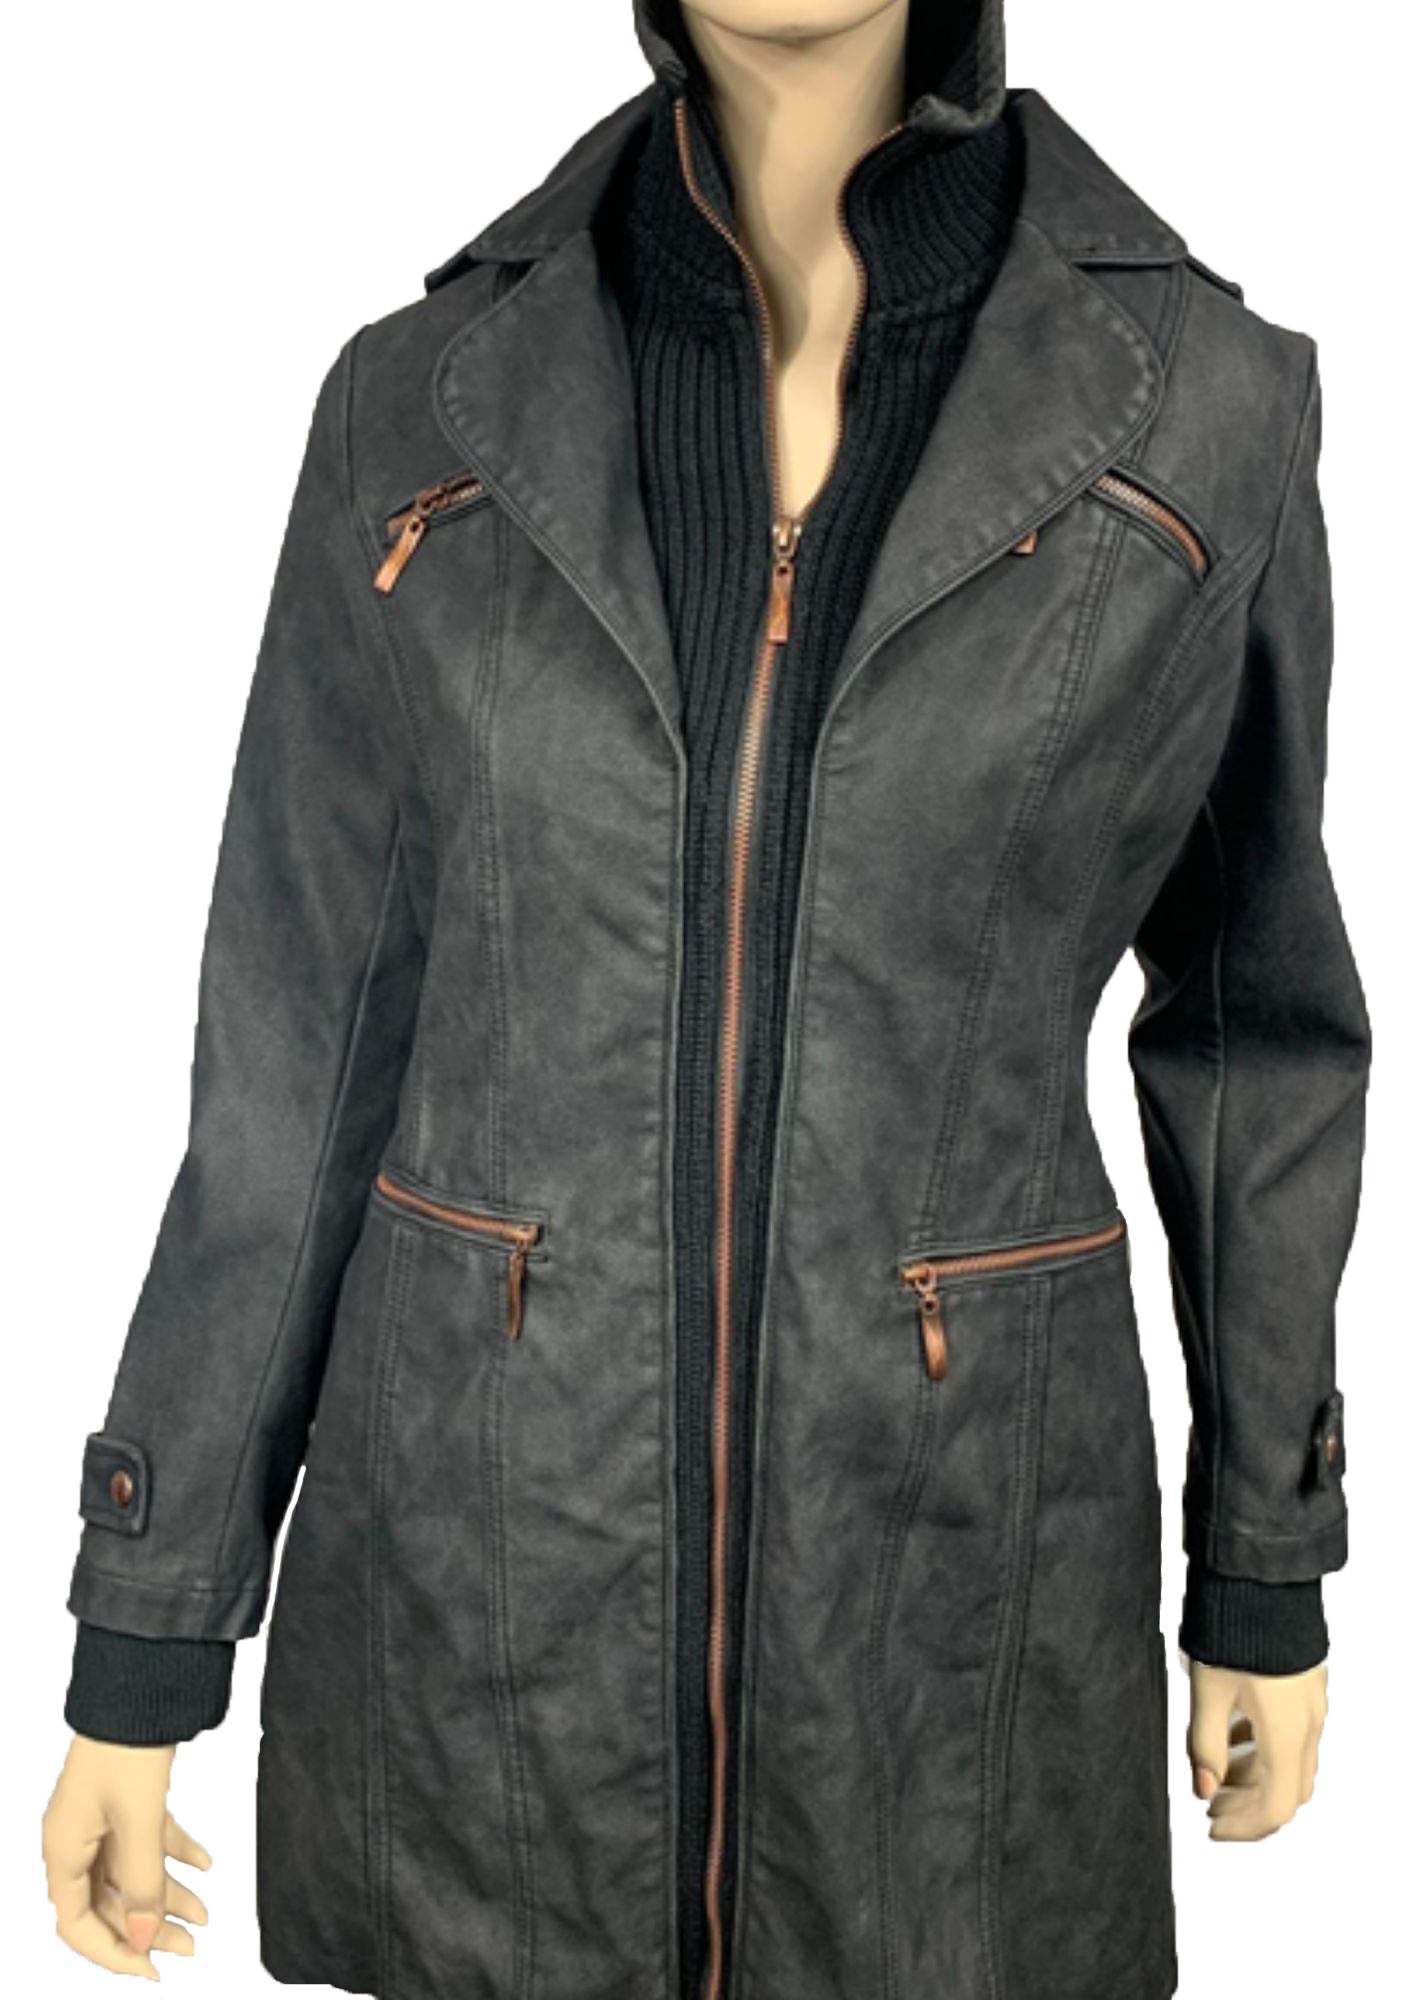 Women's Faux Leather Jacket-BF18254 CHAR/BLK